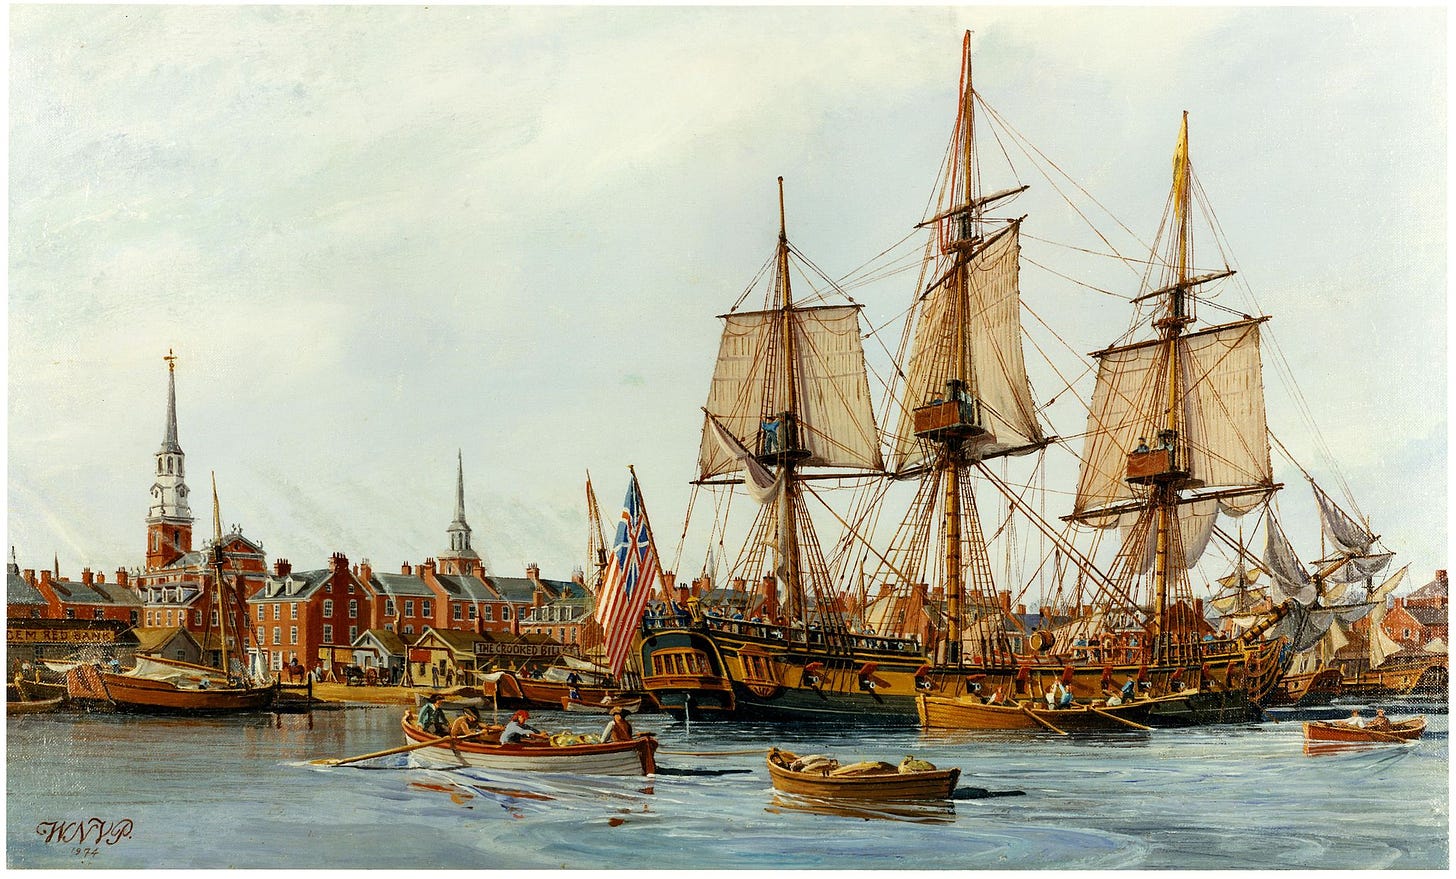 Painting by W. Nowland Van Powell, depicting Lt. John Paul Jones raising the "Grand Union" flag as the Continental ship Alfred is commissioned (Philadelphia; Dec. 3, 1775). Alfred was Hopkins's ship.